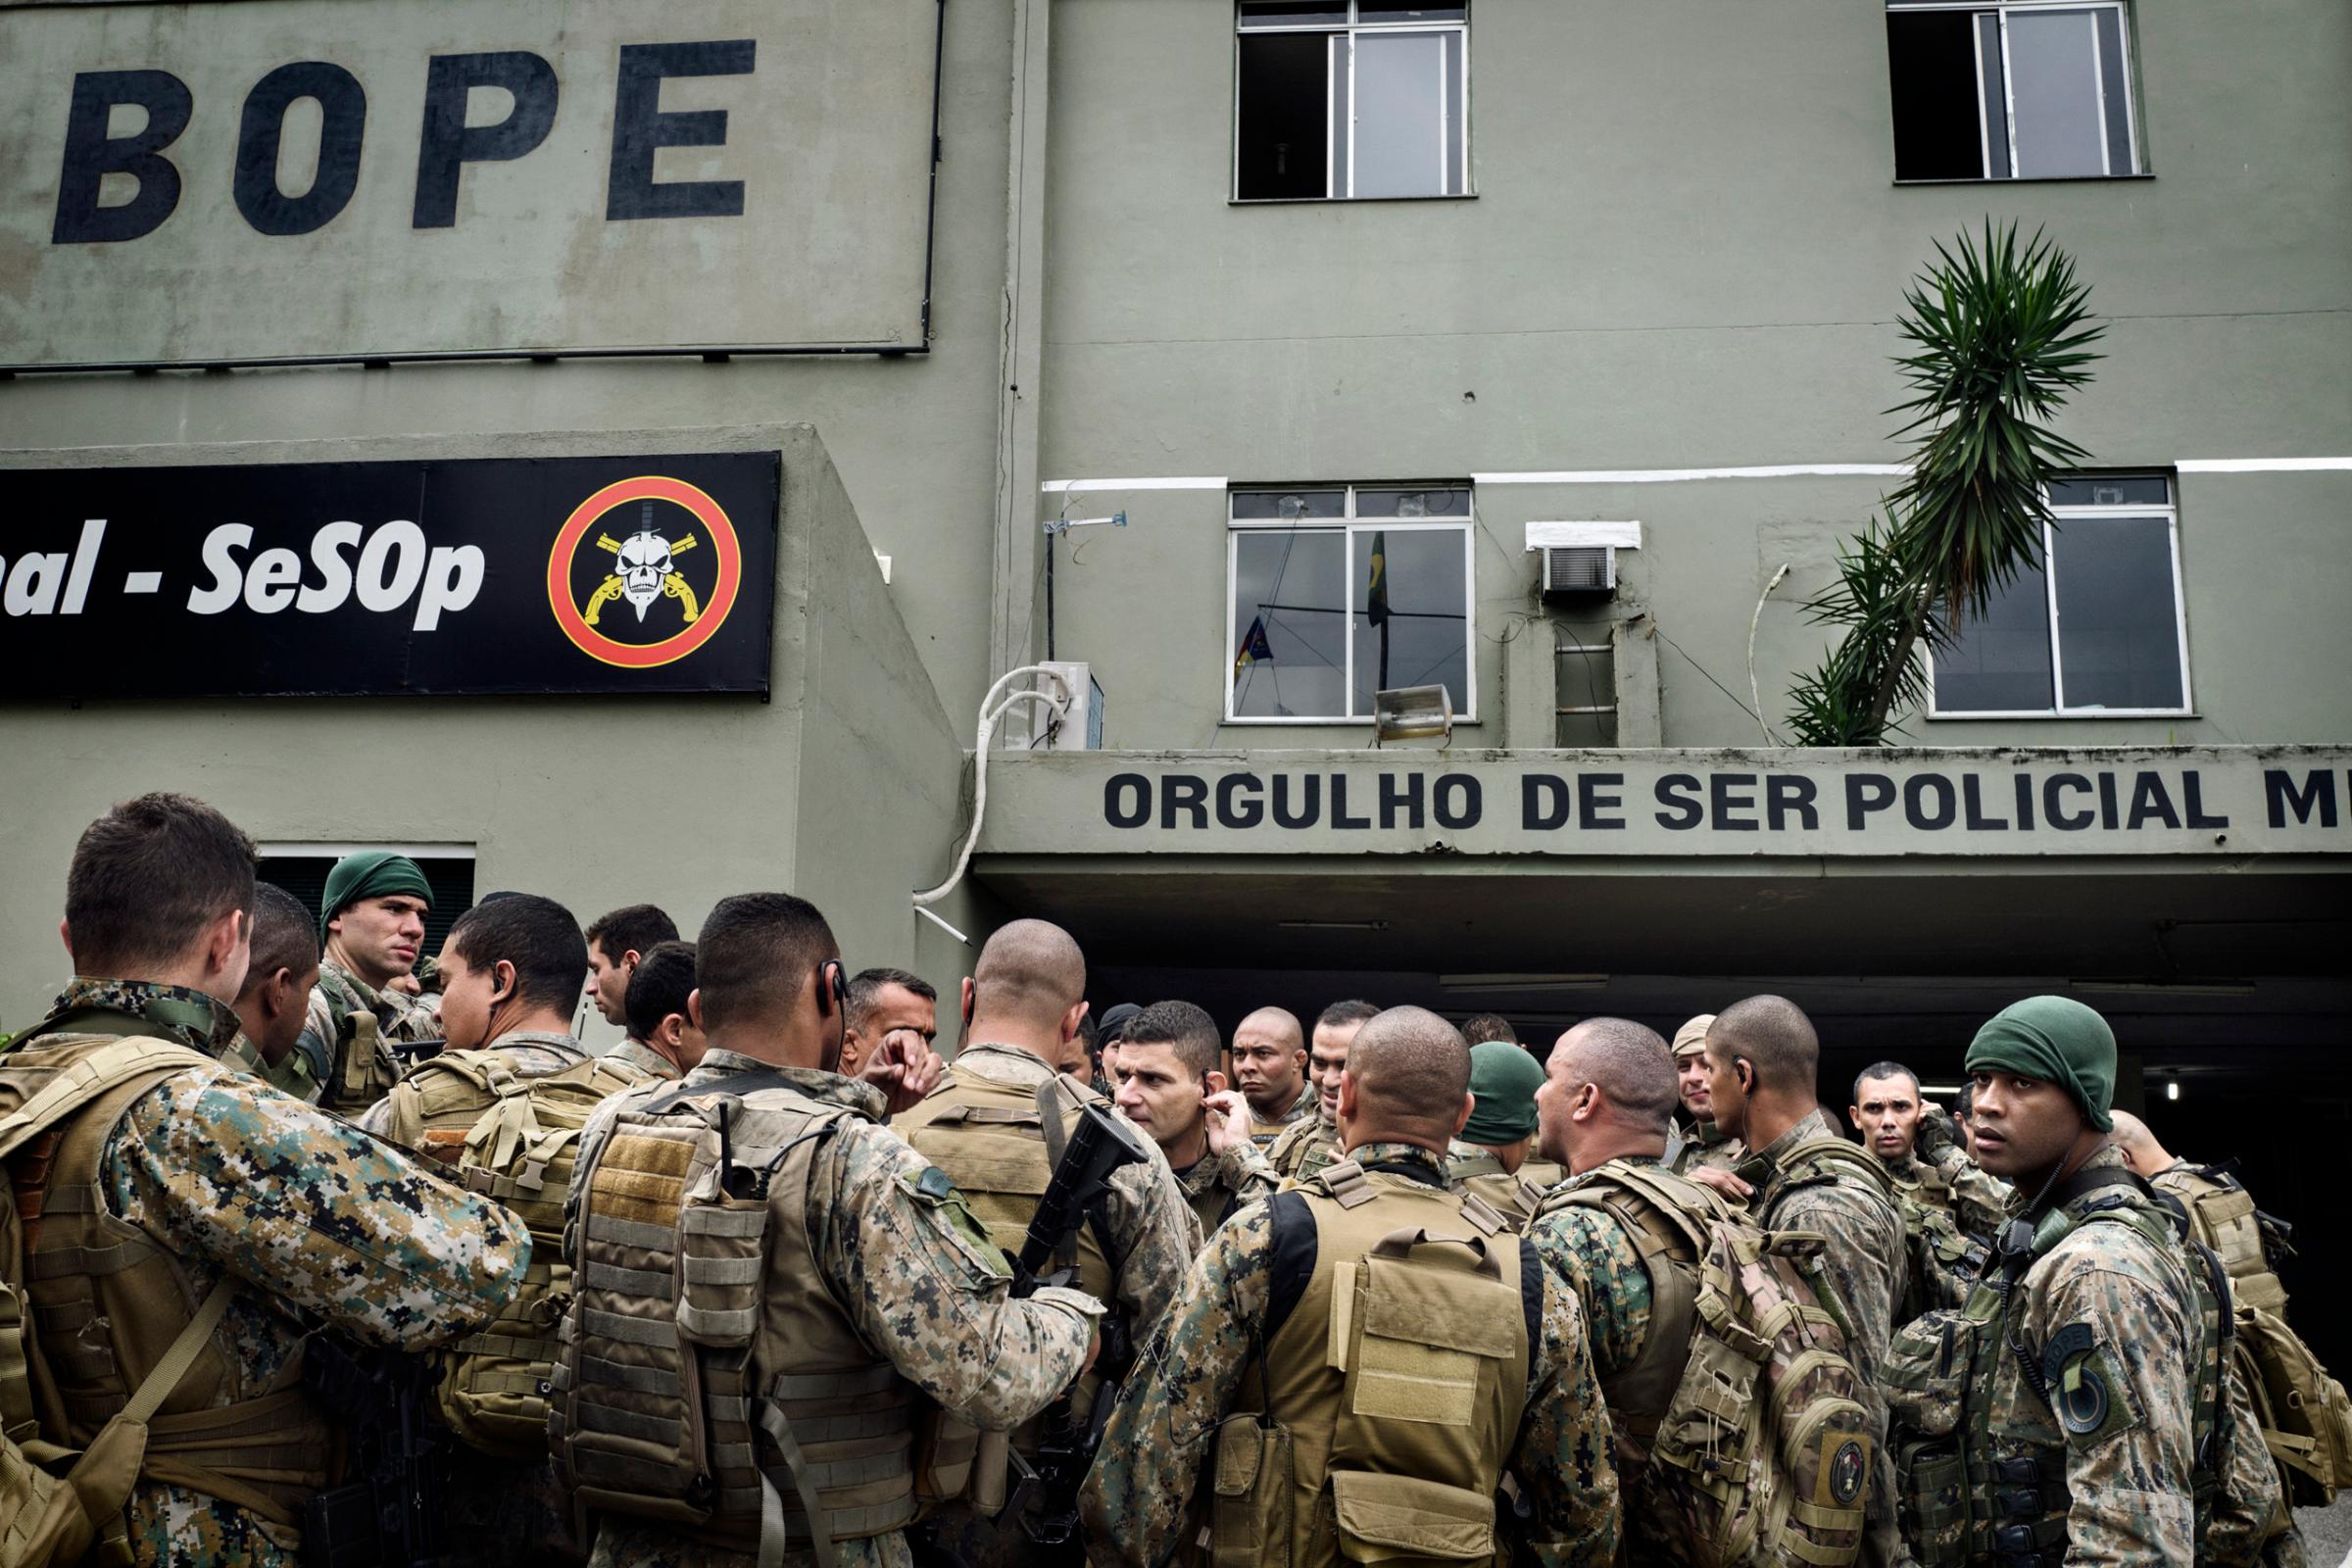 Members of BOPE (Battallion of Special Police Operations) attend a final briefing before going on an operation in one of the favelas of Rio de Janeiro.